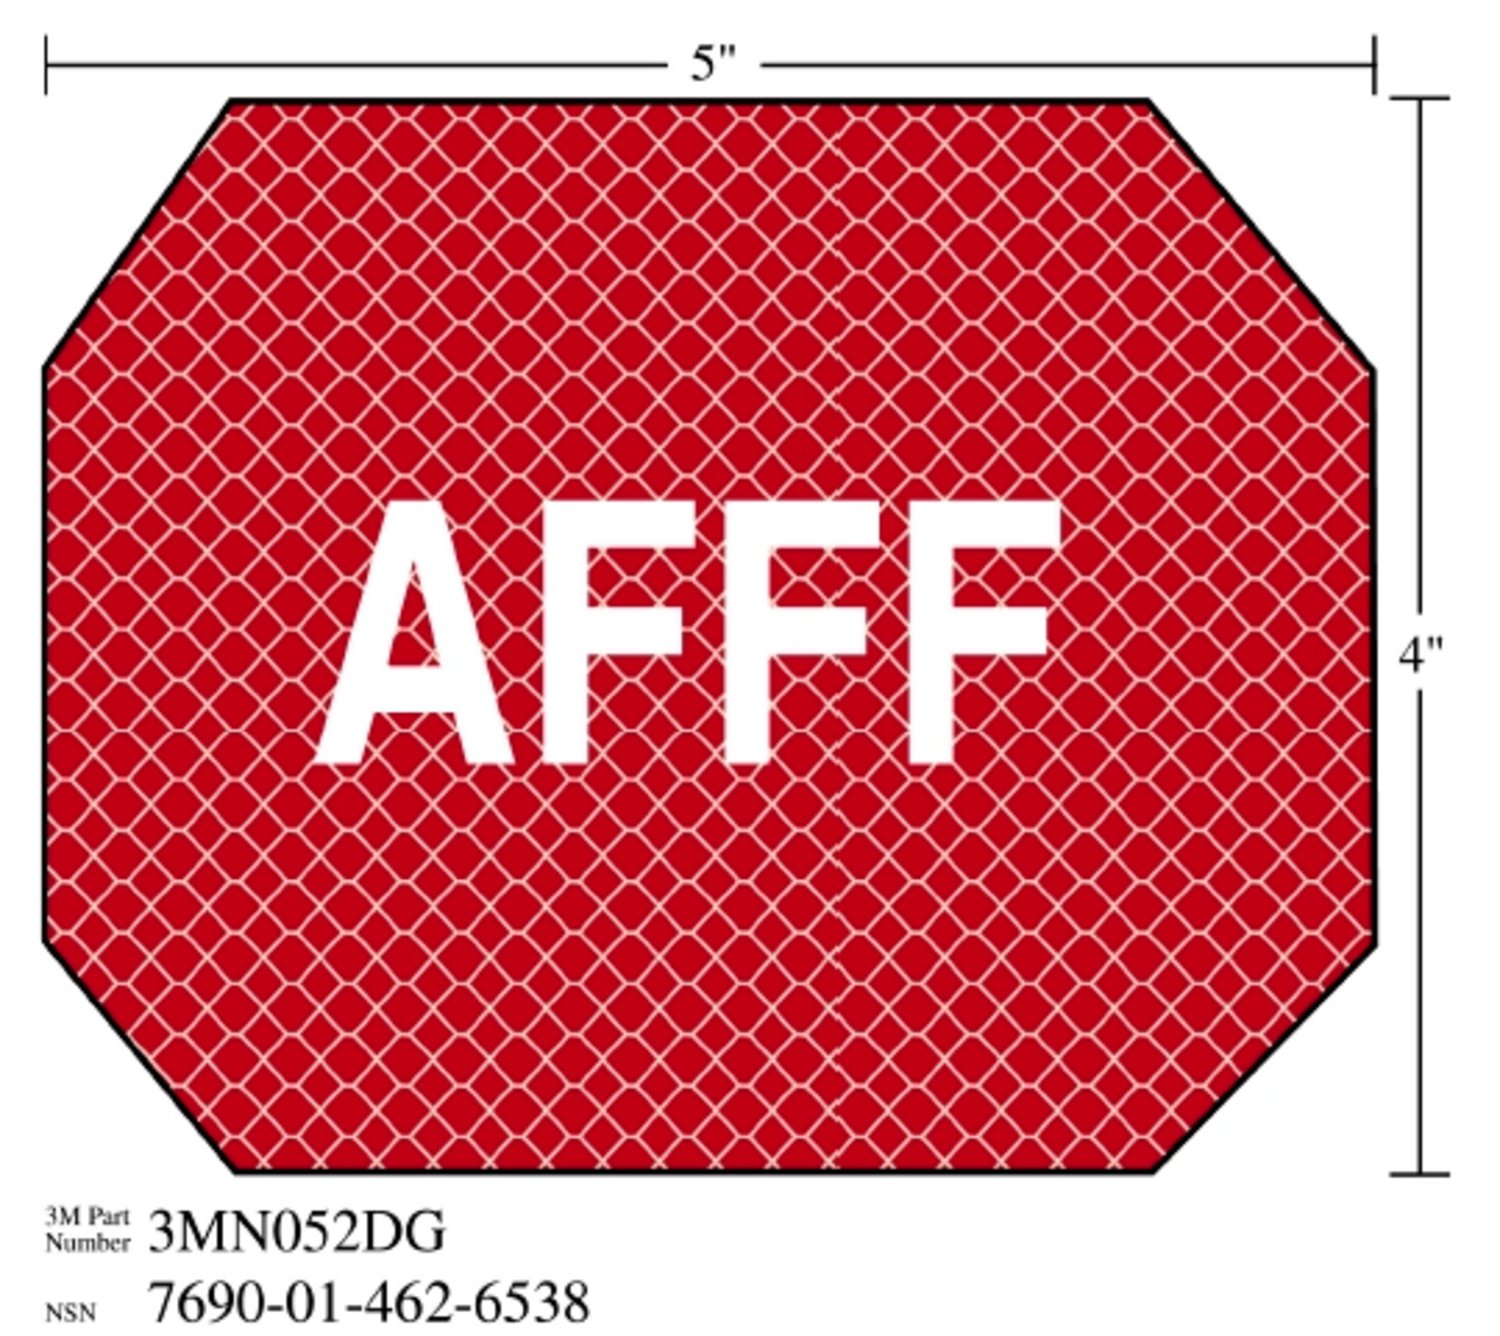 7010302550 - 3M Diamond Grade Damage Control Sign 3MN052DG, "AFFF", 5 in x 4 in,
10/Package